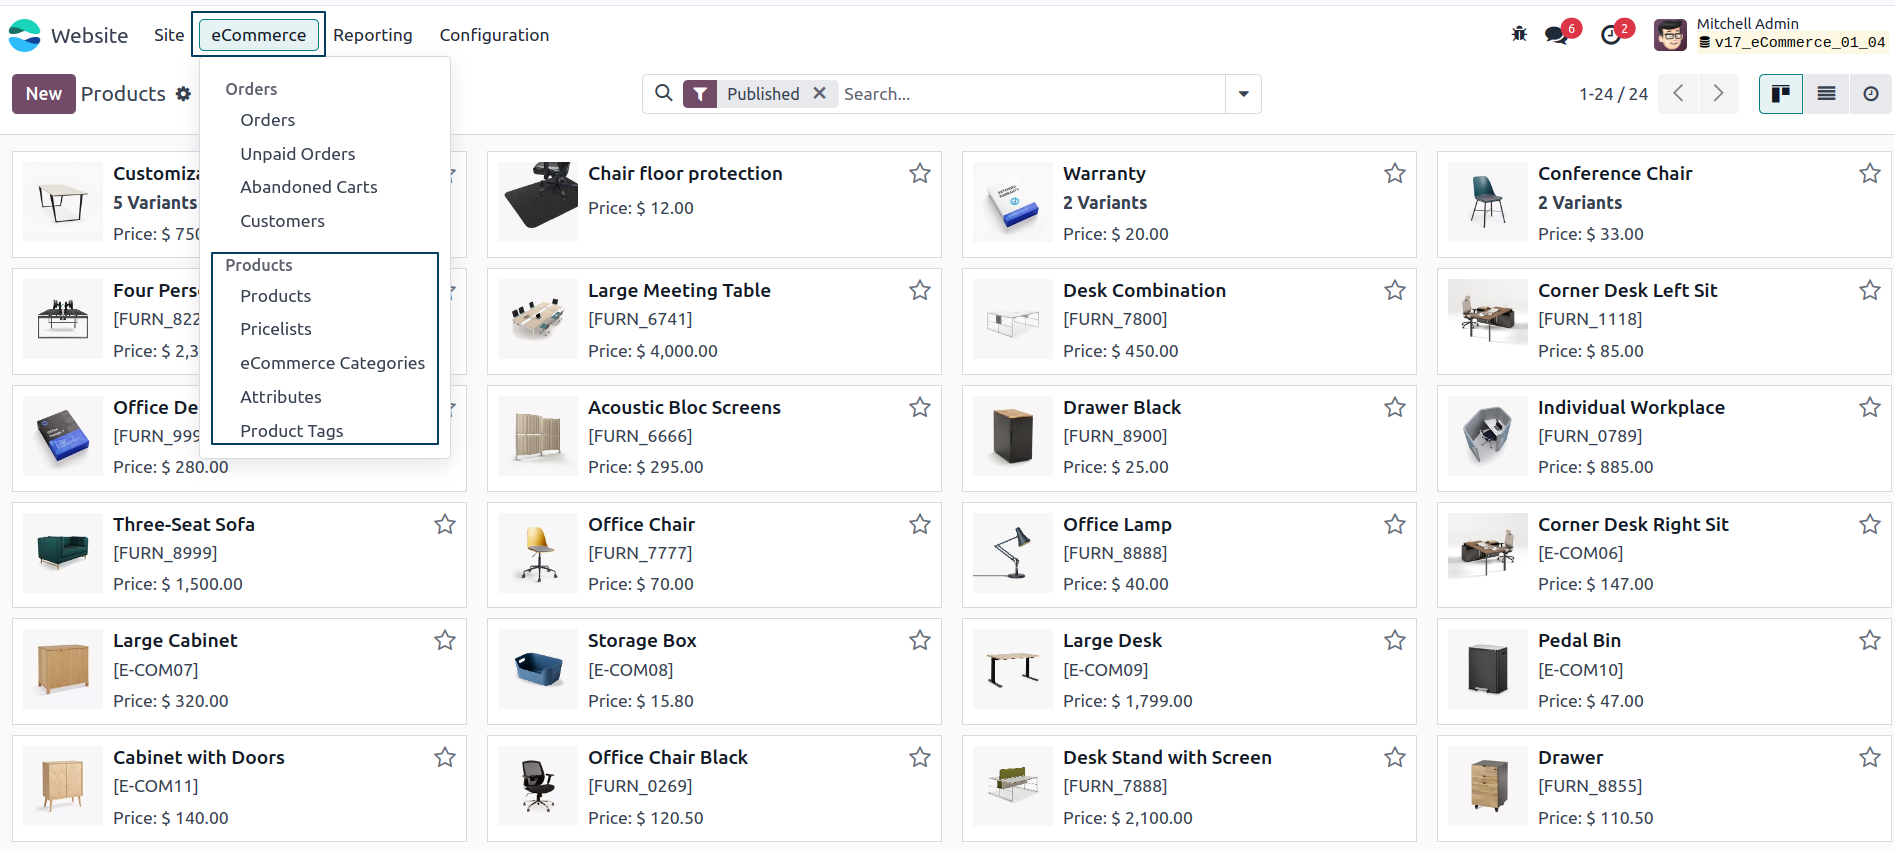 Odoo ecommerce products list